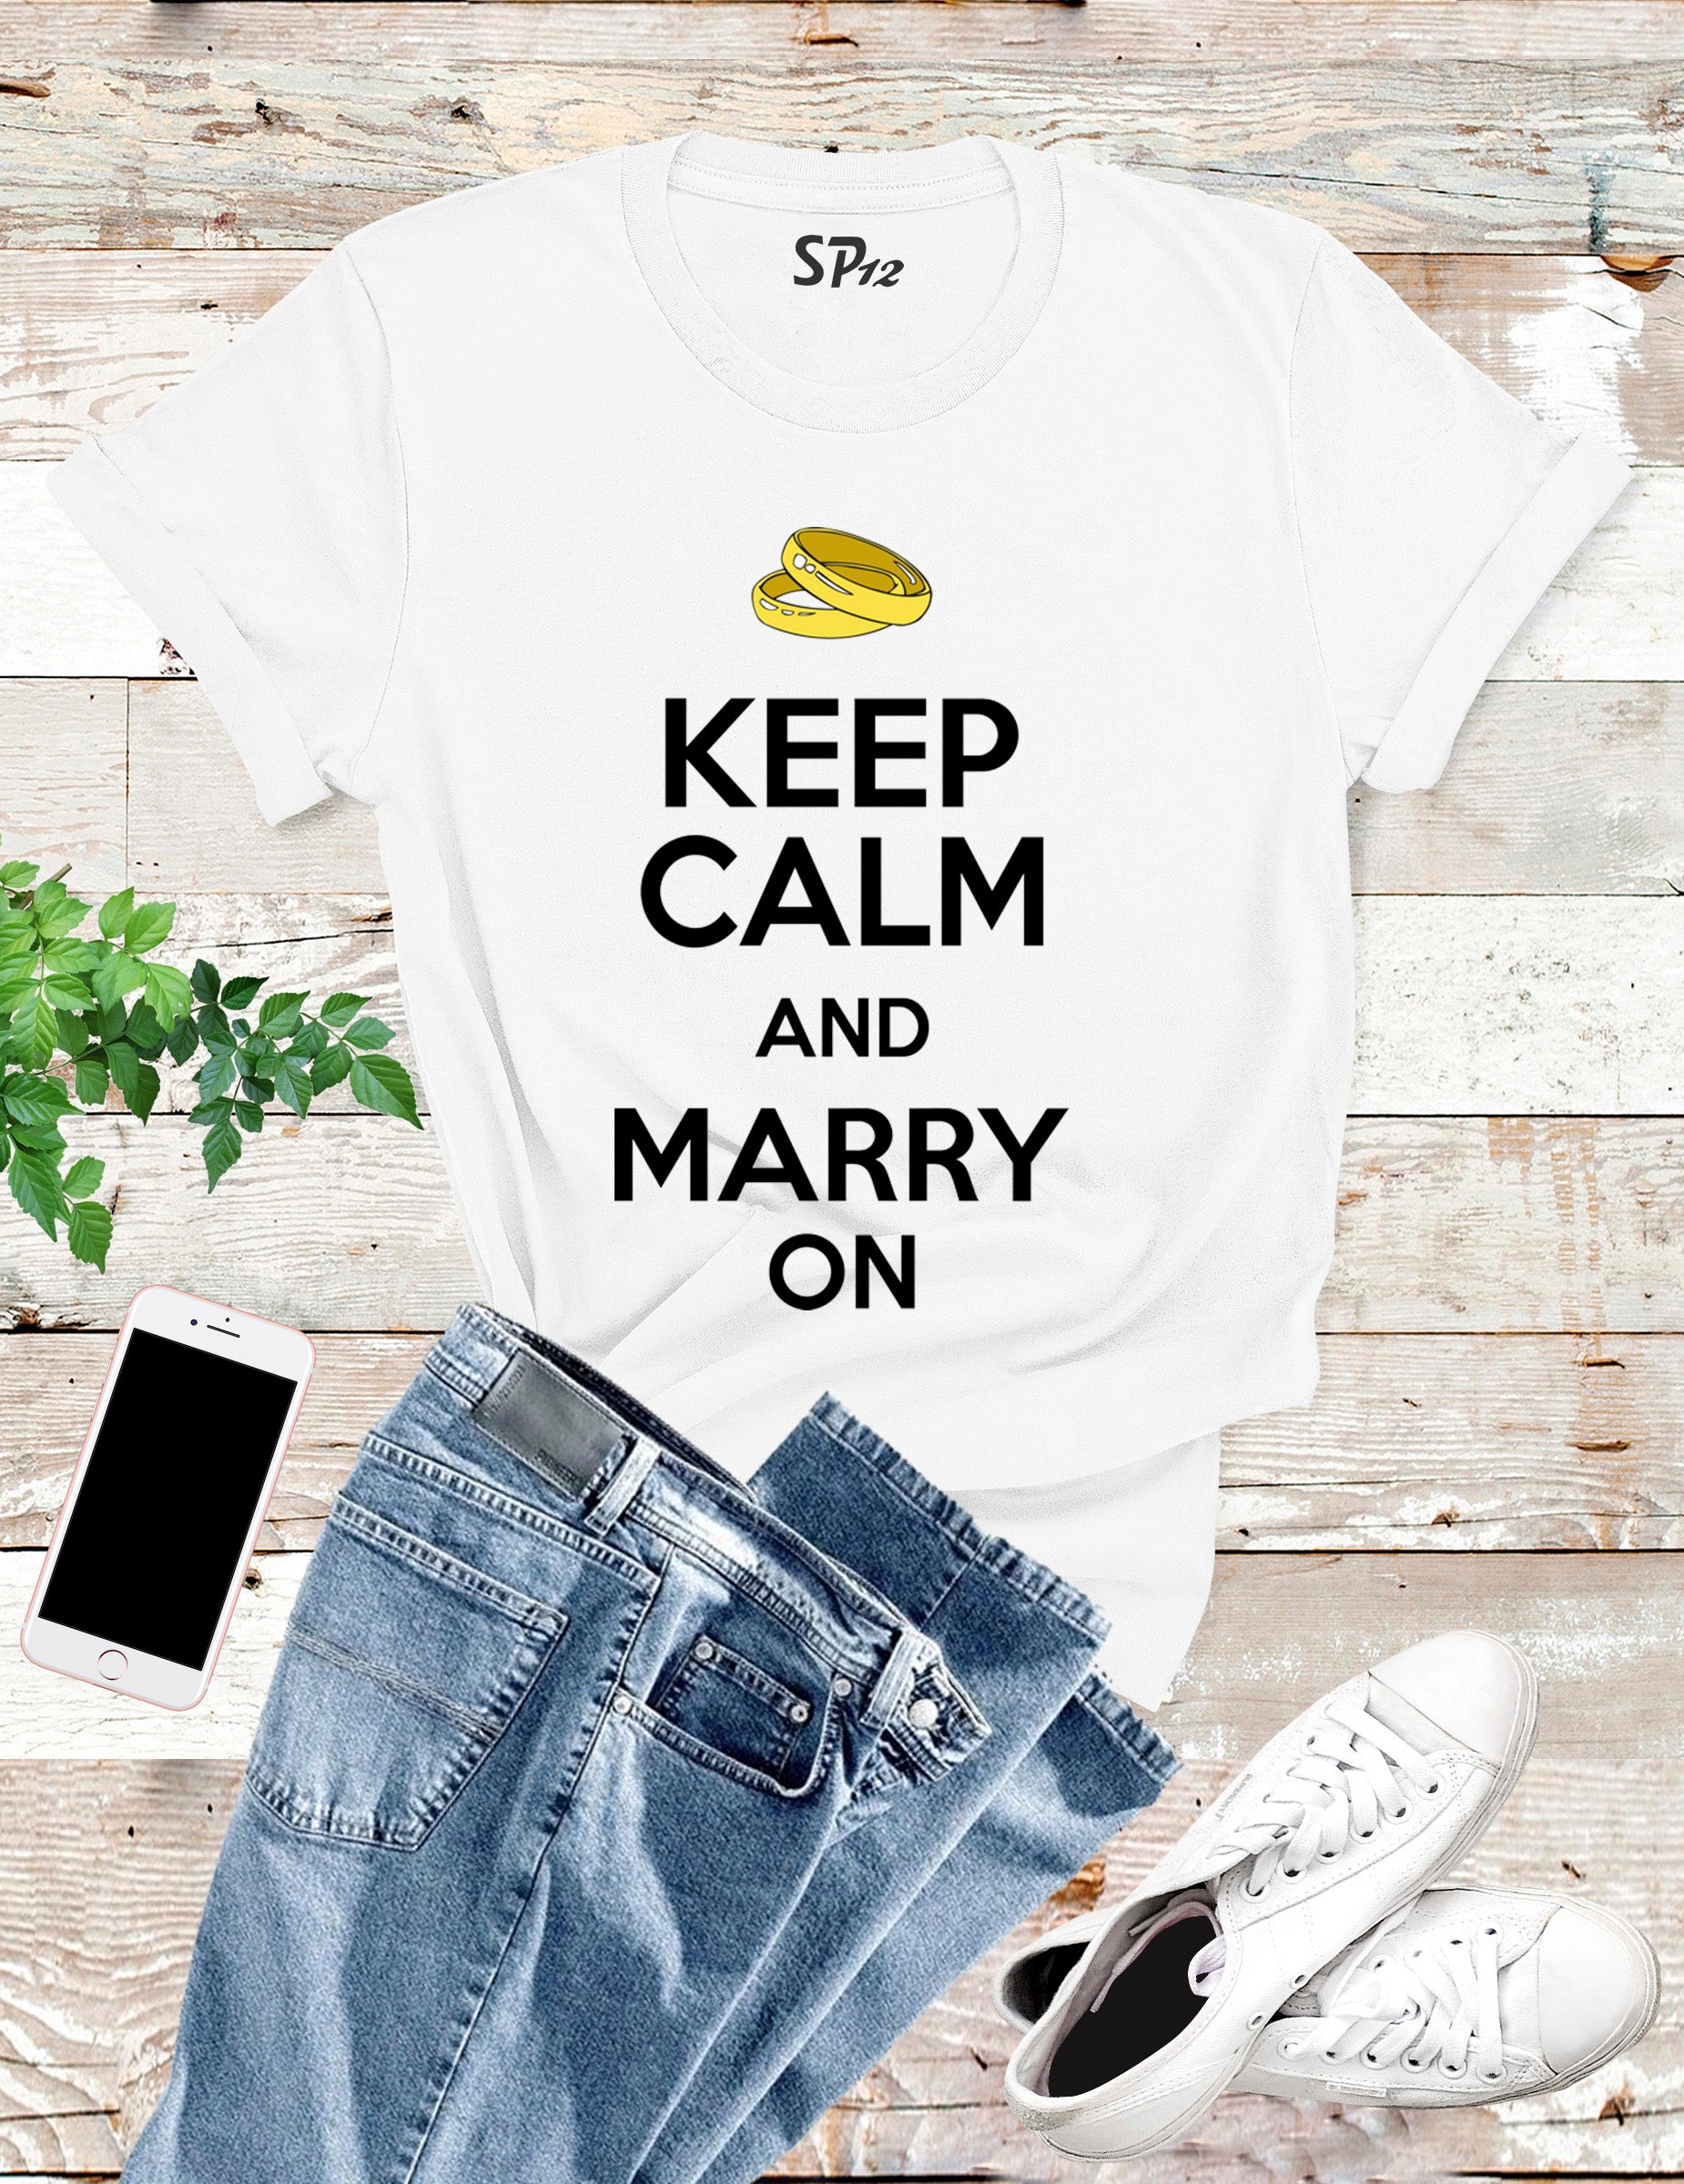 Wedding Marriage Rings T shirt Keep Calm and Marry On